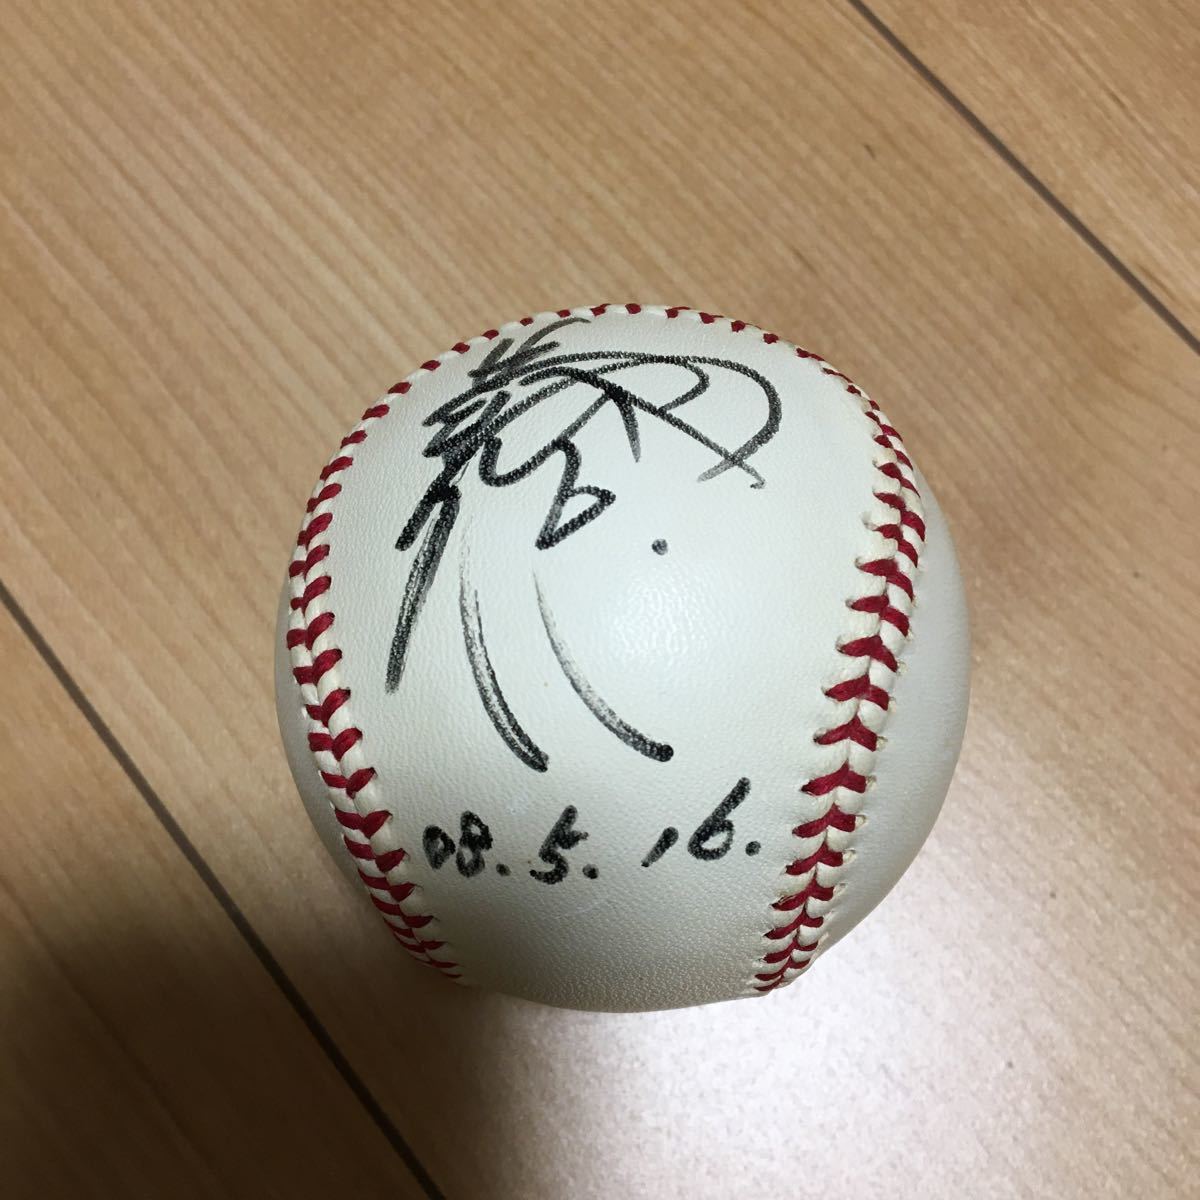  origin Chunichi Dragons *. edge . peace player * autograph autograph ball * throwing inserting throwing included *